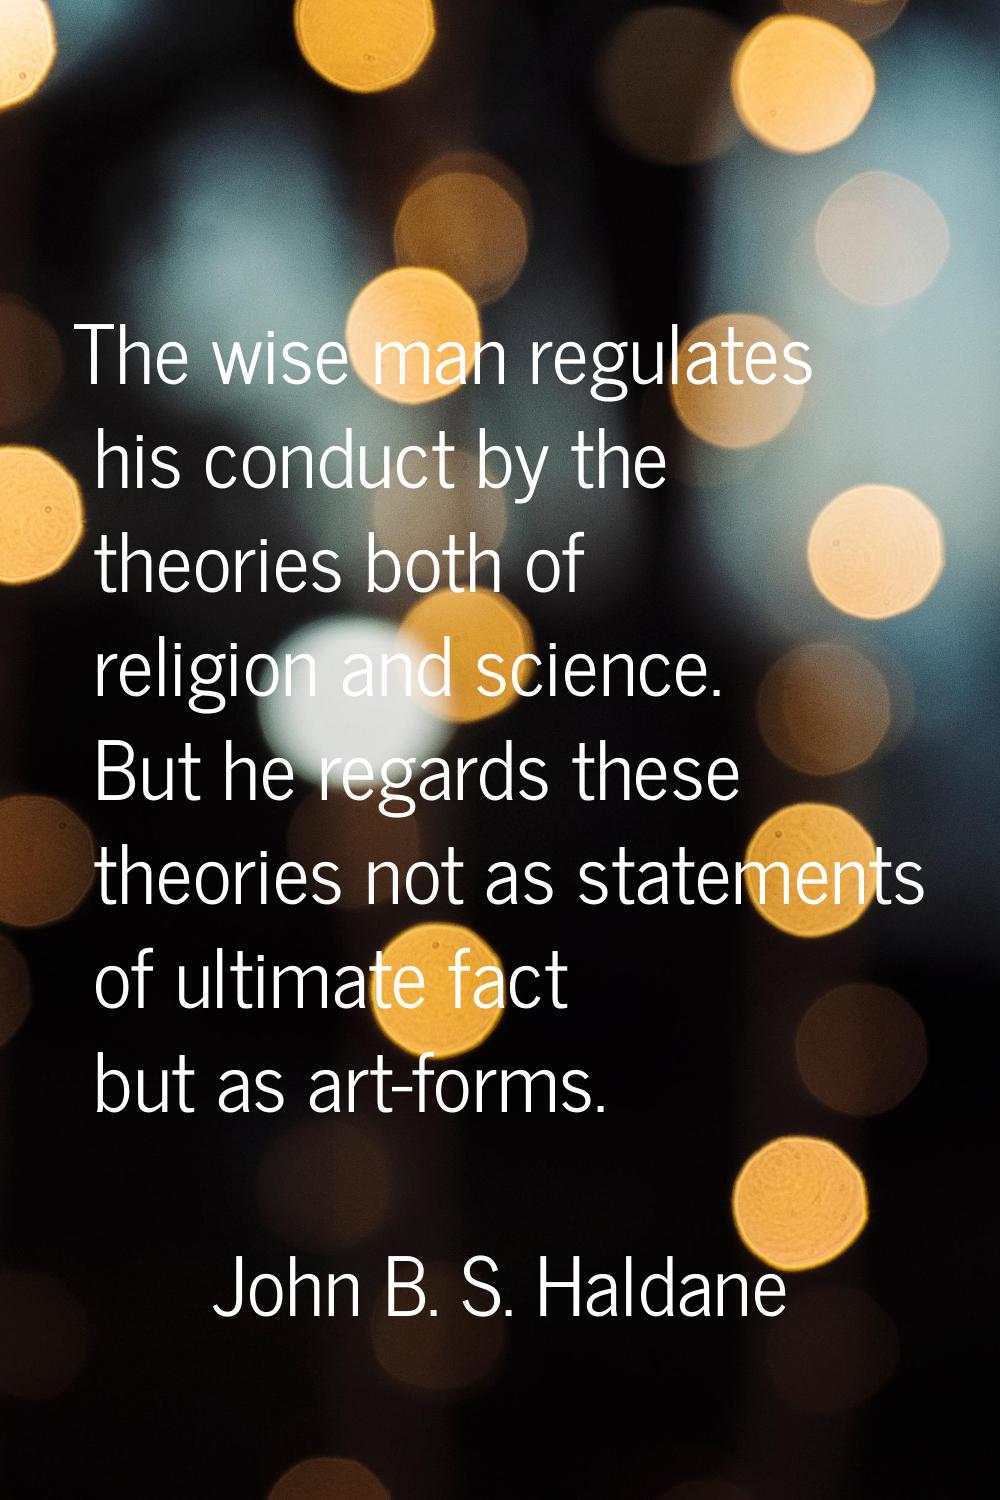 The wise man regulates his conduct by the theories both of religion and science. But he regards the